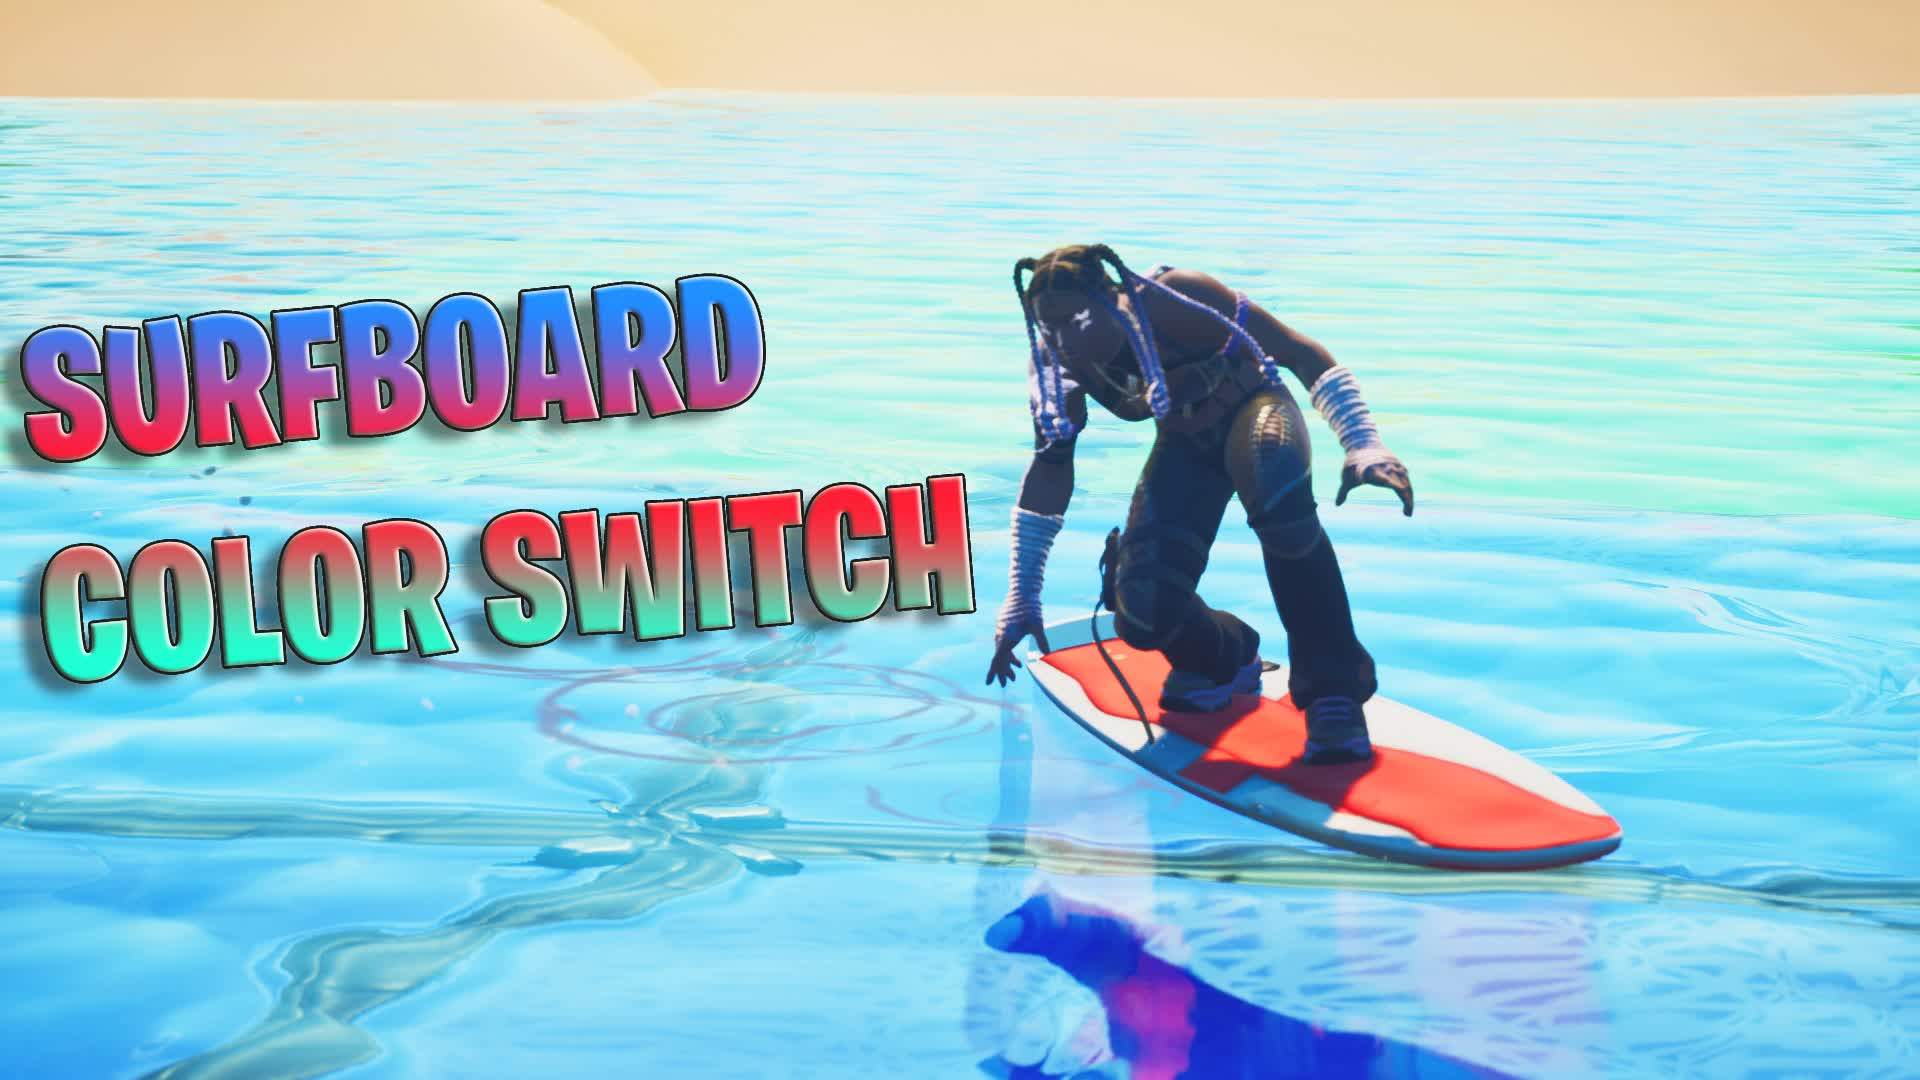 🏄SURFBOARD COLOR SWITCH